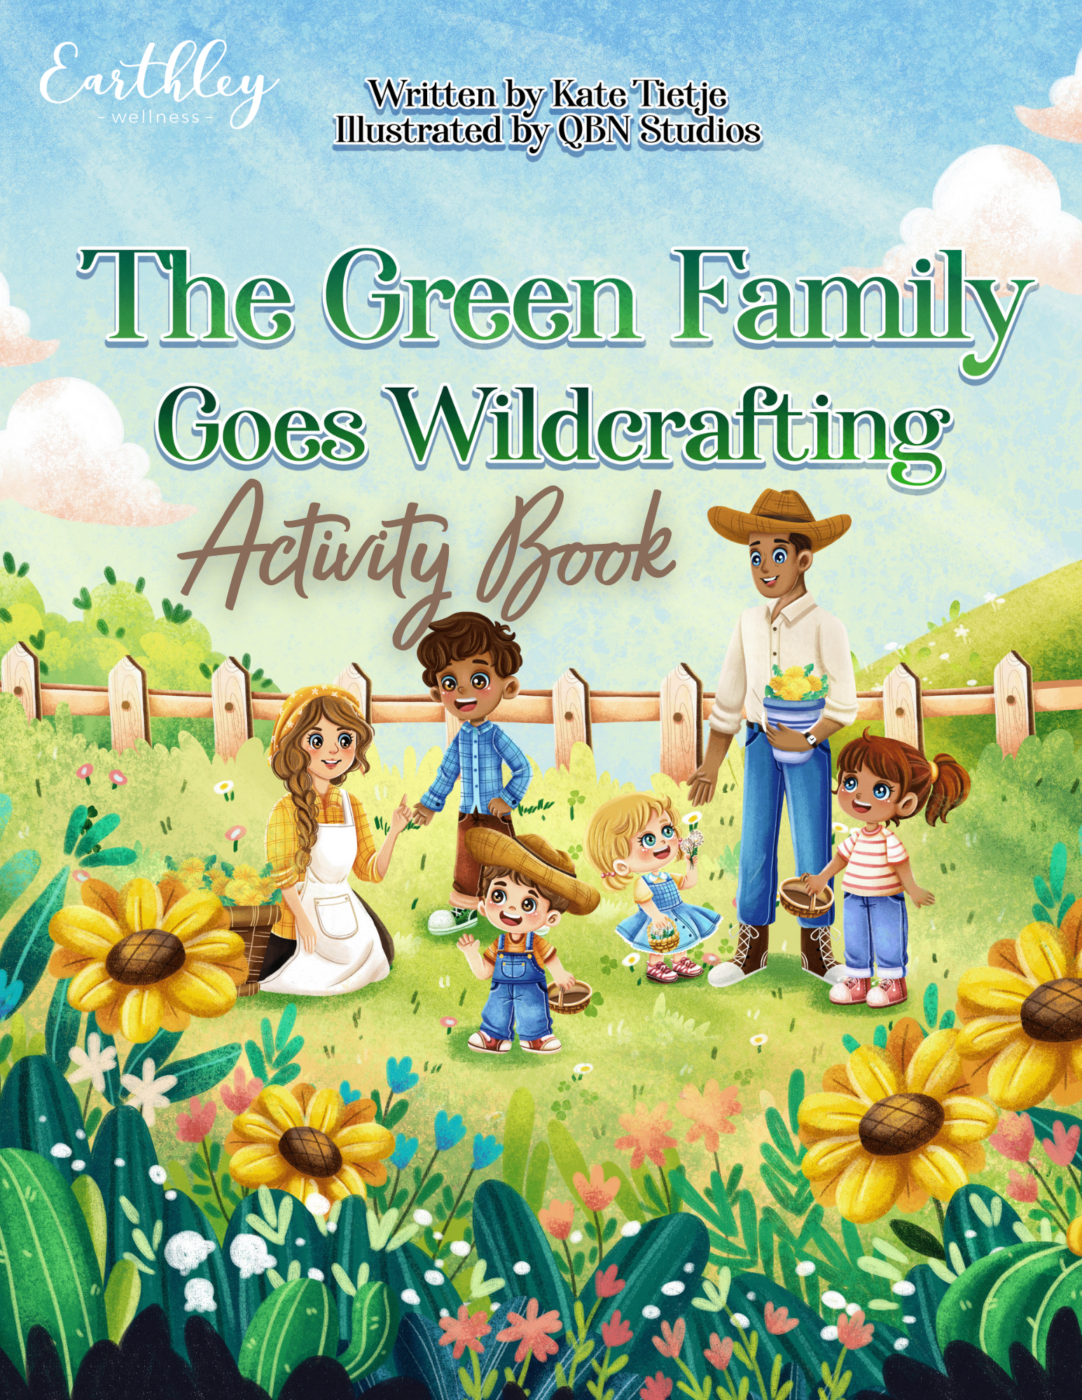 The Green Family Goes Wildcrafting Activity Book